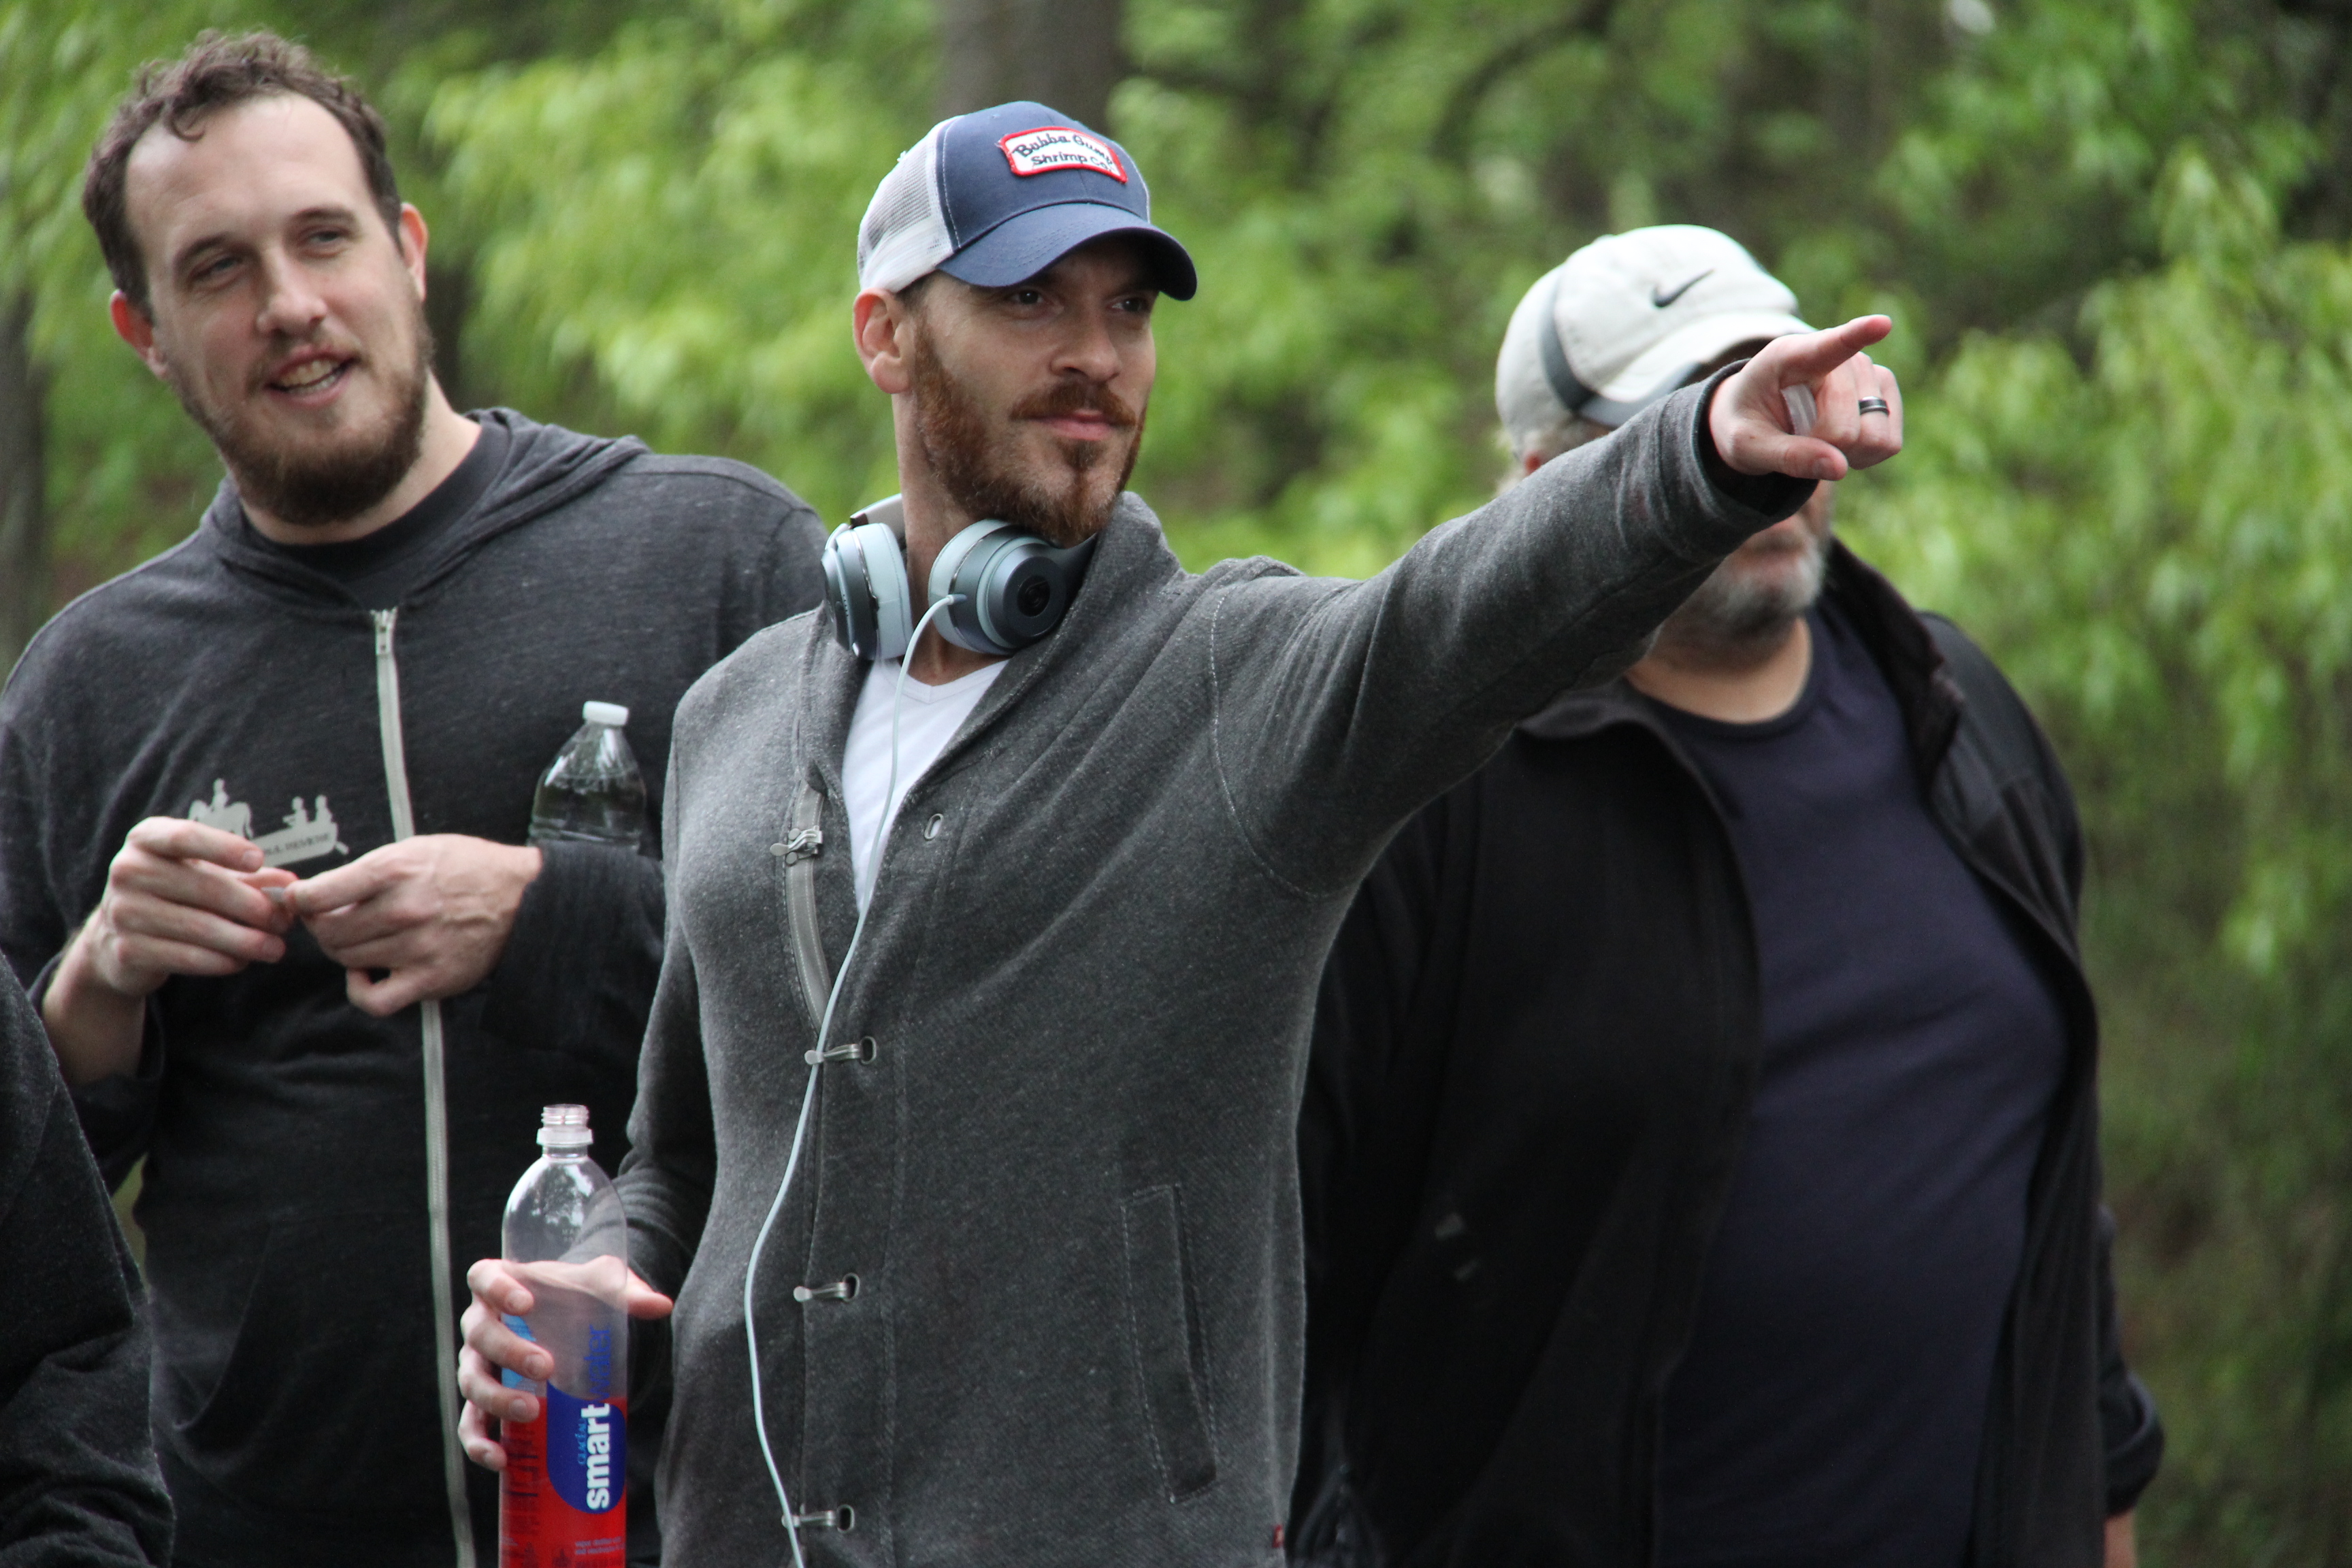 director Jason DeVan on location in Georgia for Tell Me Your Name